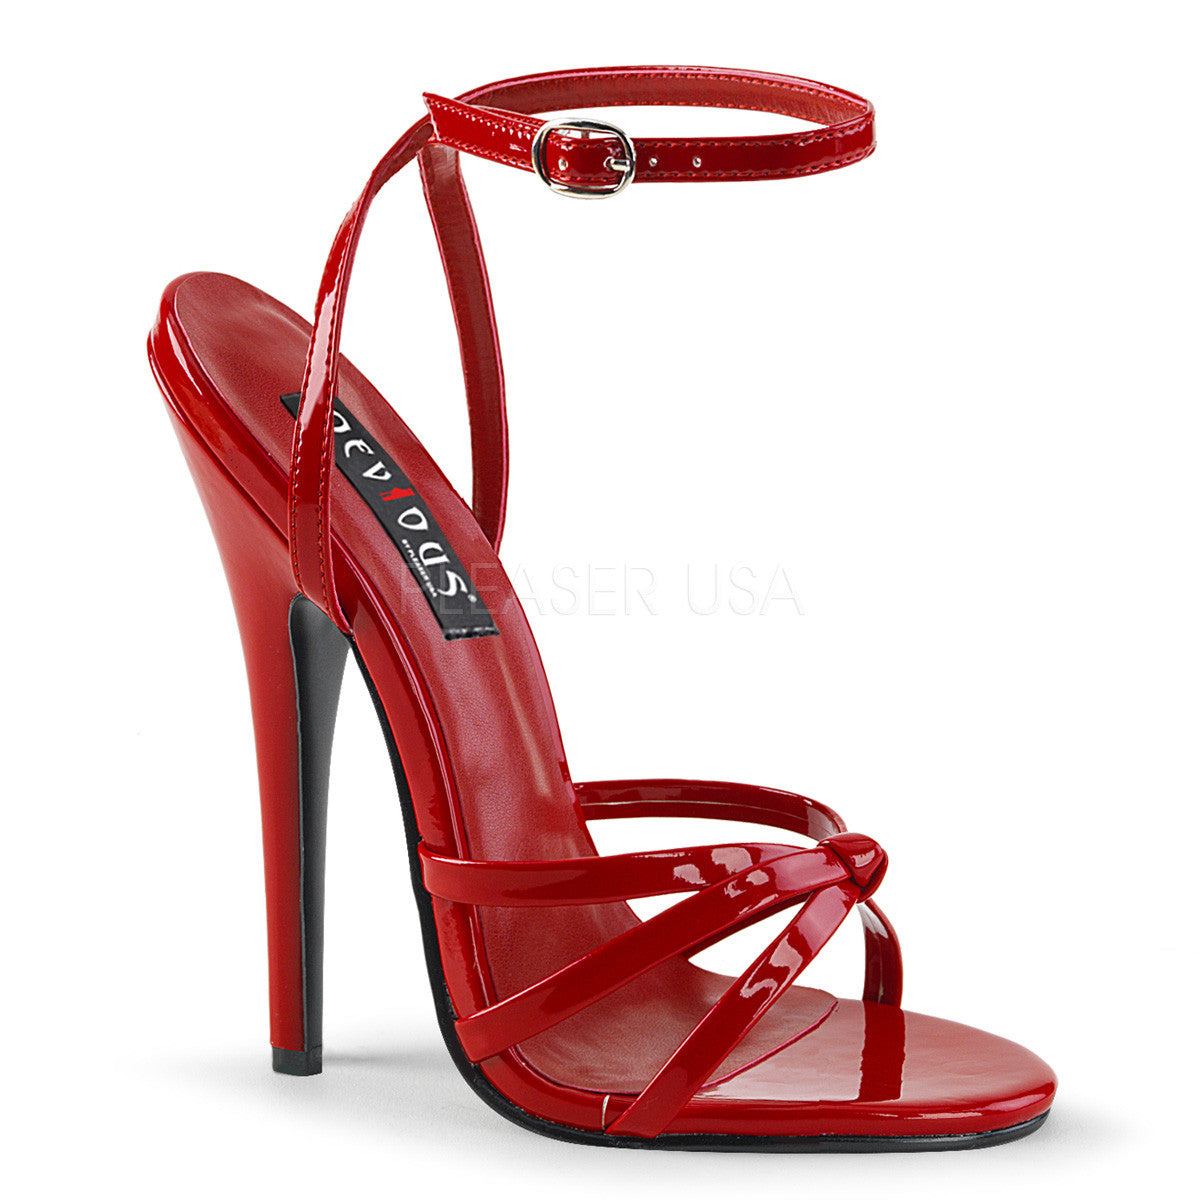 6" Stiletto Heel Red Pat Wrap Around Knotted Strap Sandal